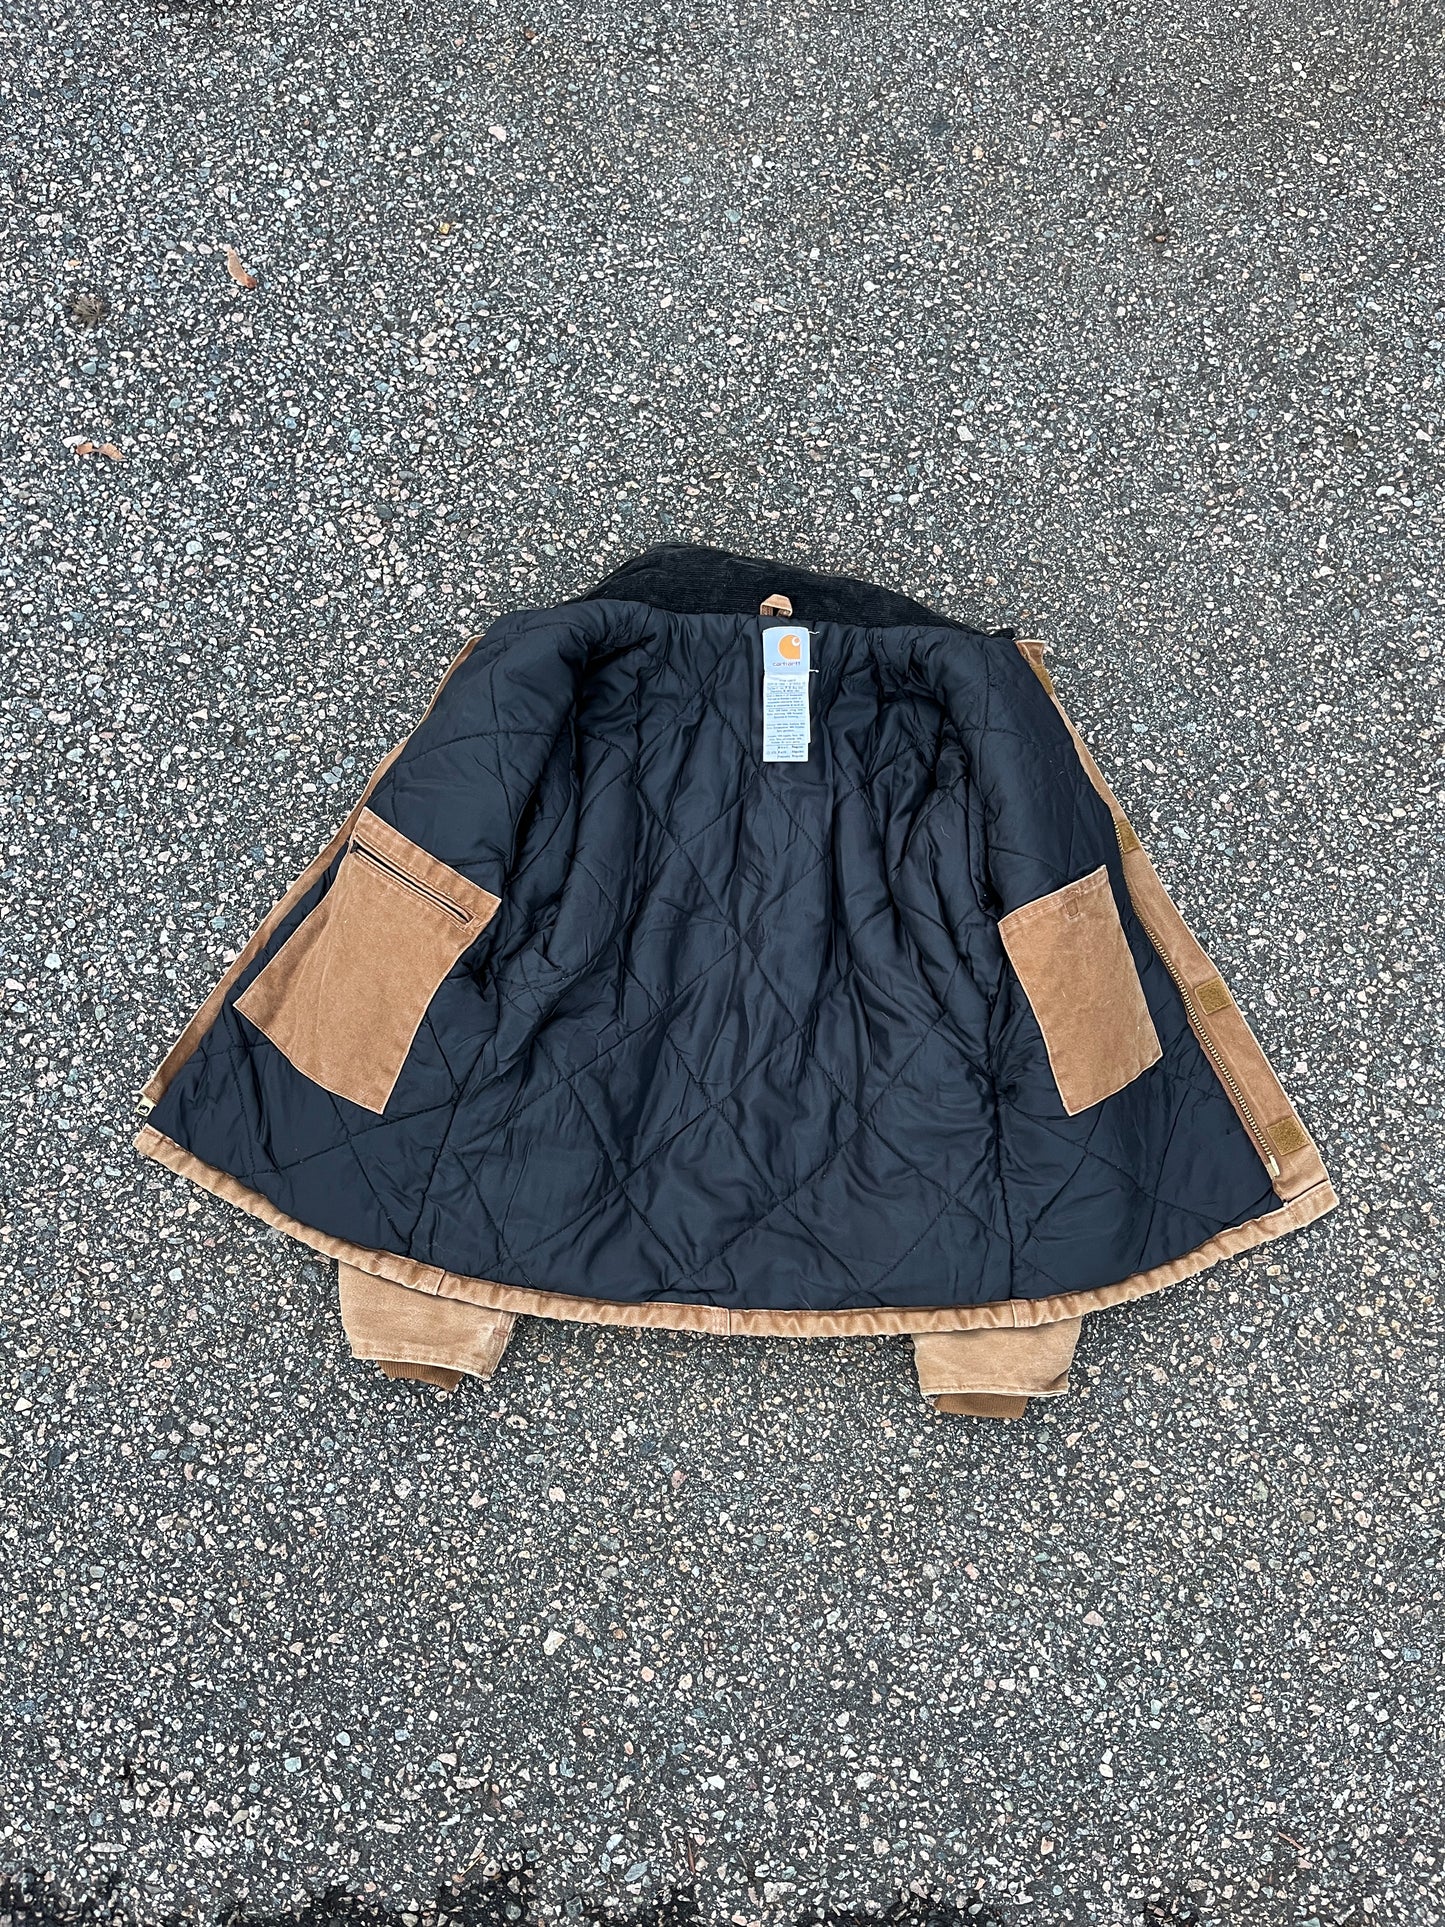 Faded Brown Carhartt Arctic Jacket - Small